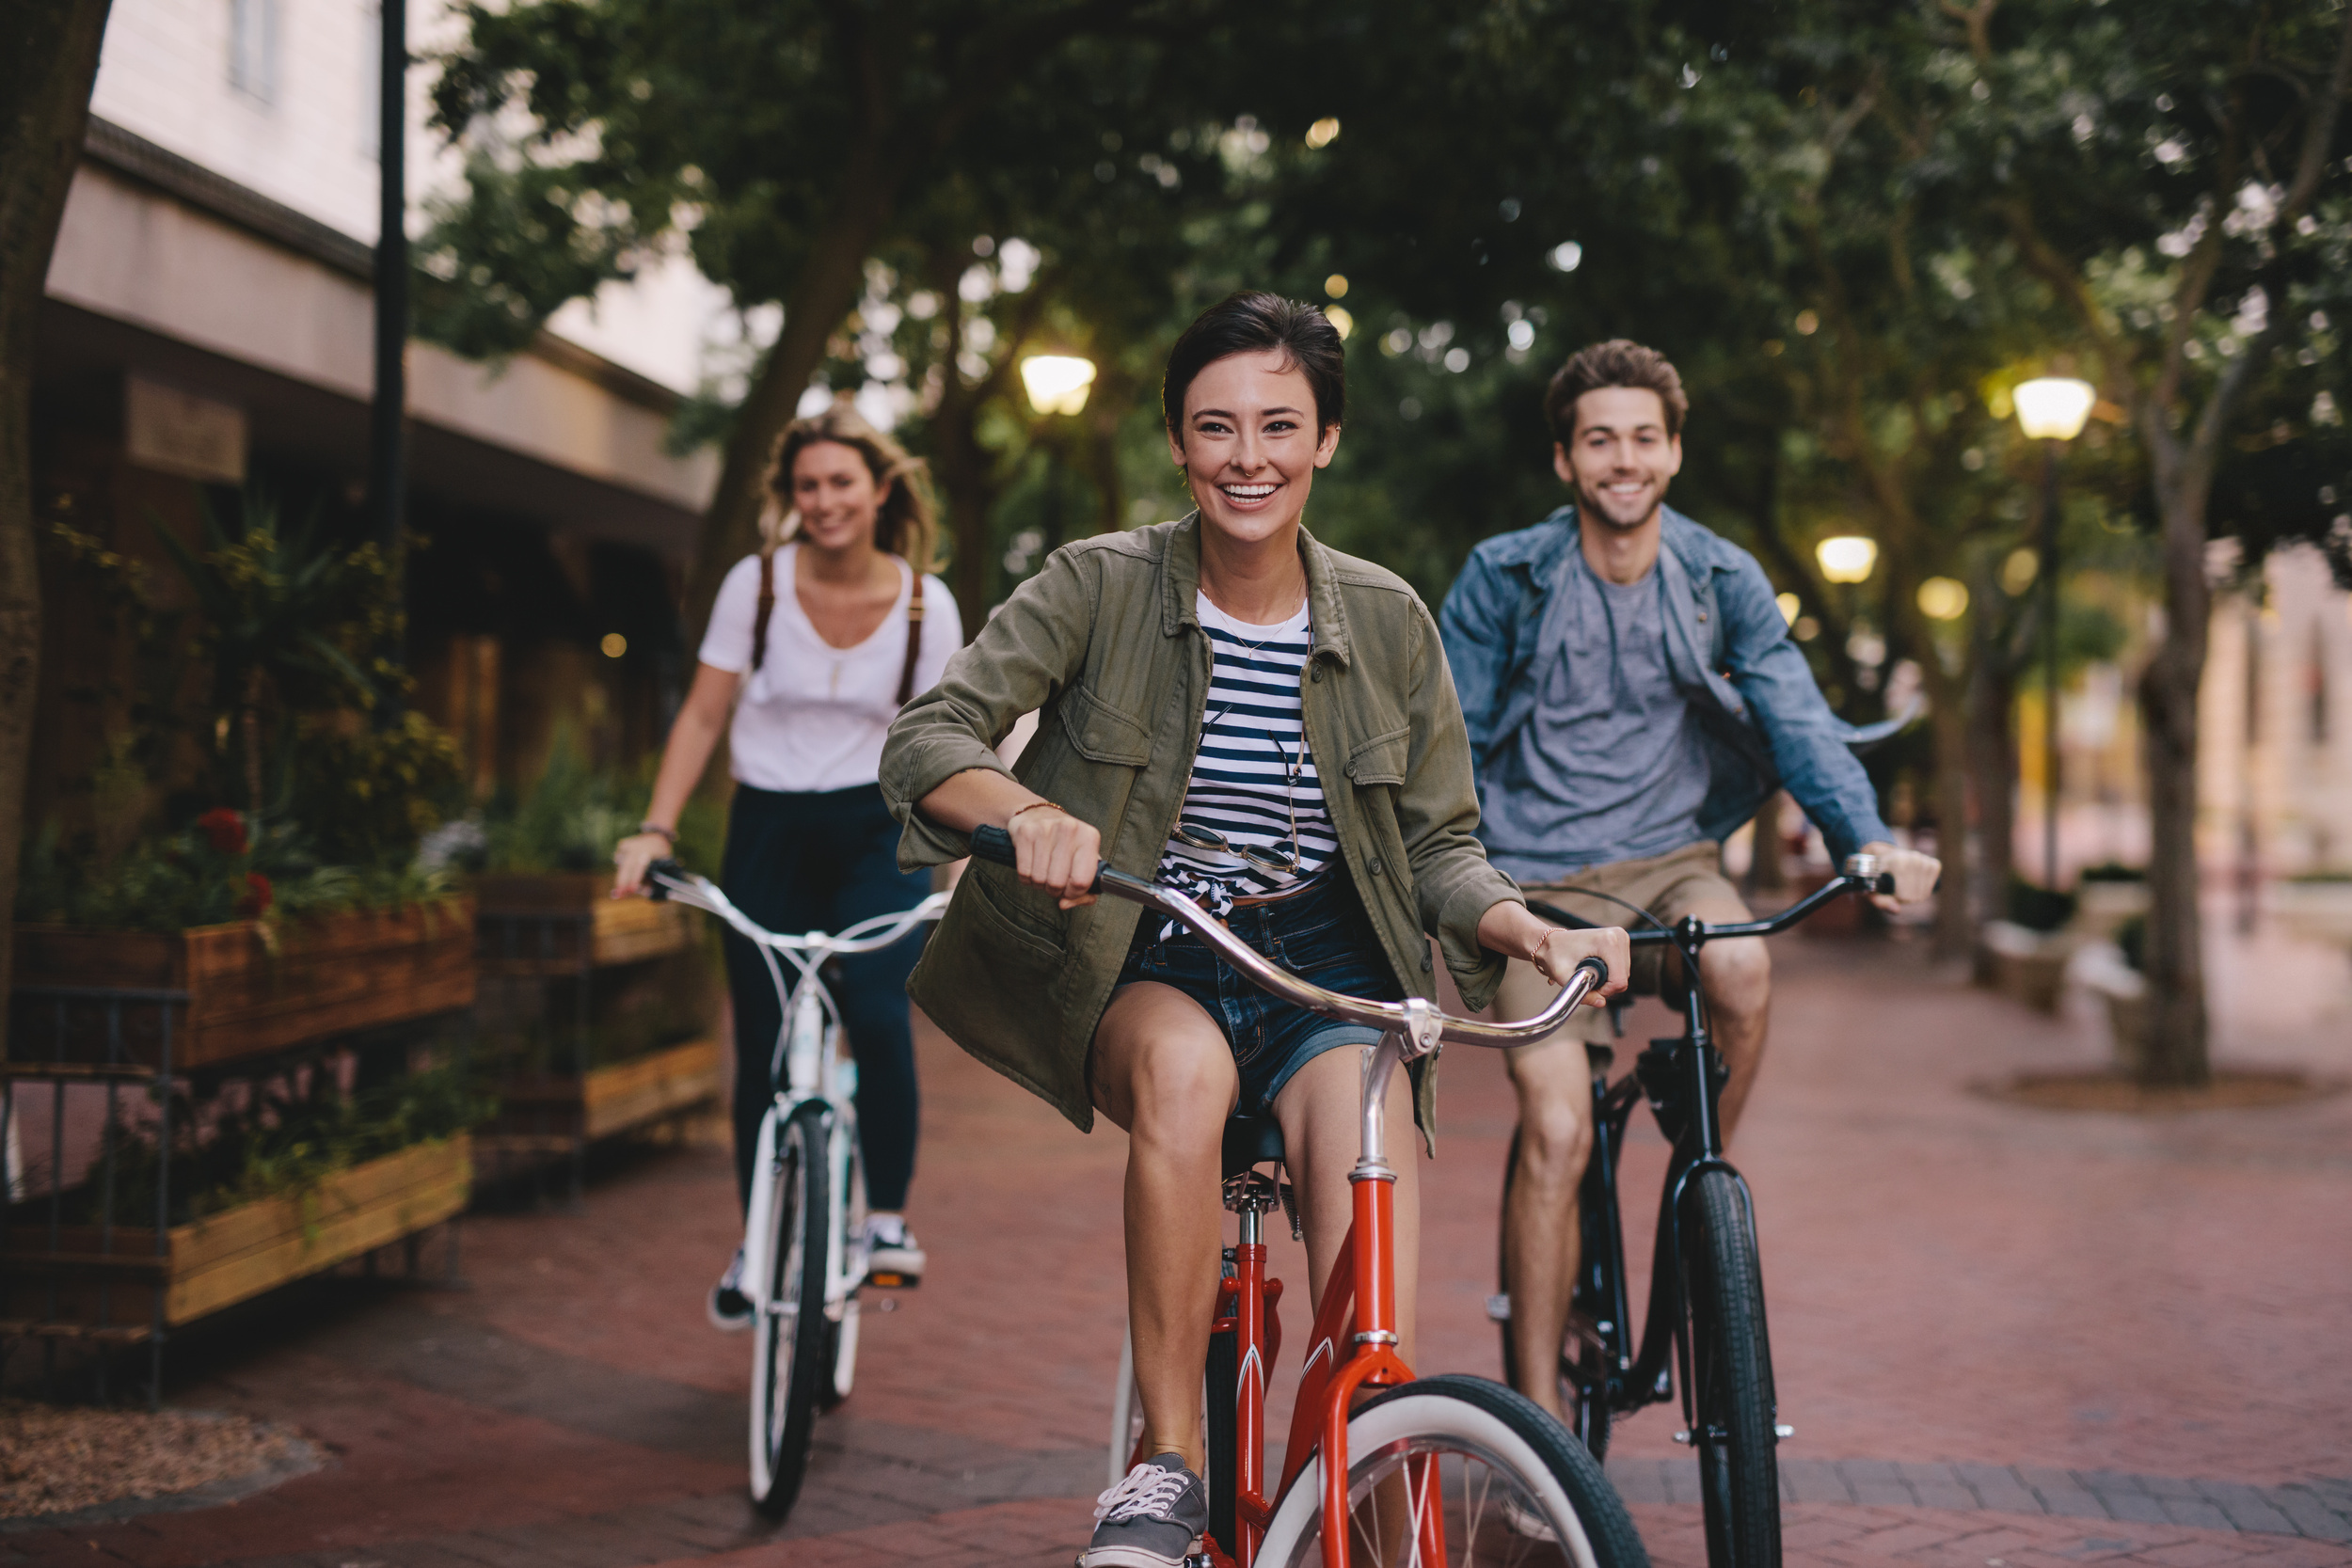 <p>Like the cities in Europe are more walkable, they’re also typically more bike-friendly. It isn’t just Amsterdam where bike lanes are common, and you’ll have numerous friends and colleagues commuting on two wheels.</p><p>You may also like: <a href='https://www.yardbarker.com/lifestyle/articles/15_things_you_should_eat_in_the_pacific_northwest_031924/s1__38261249'>15 things you should eat in the Pacific Northwest</a></p>